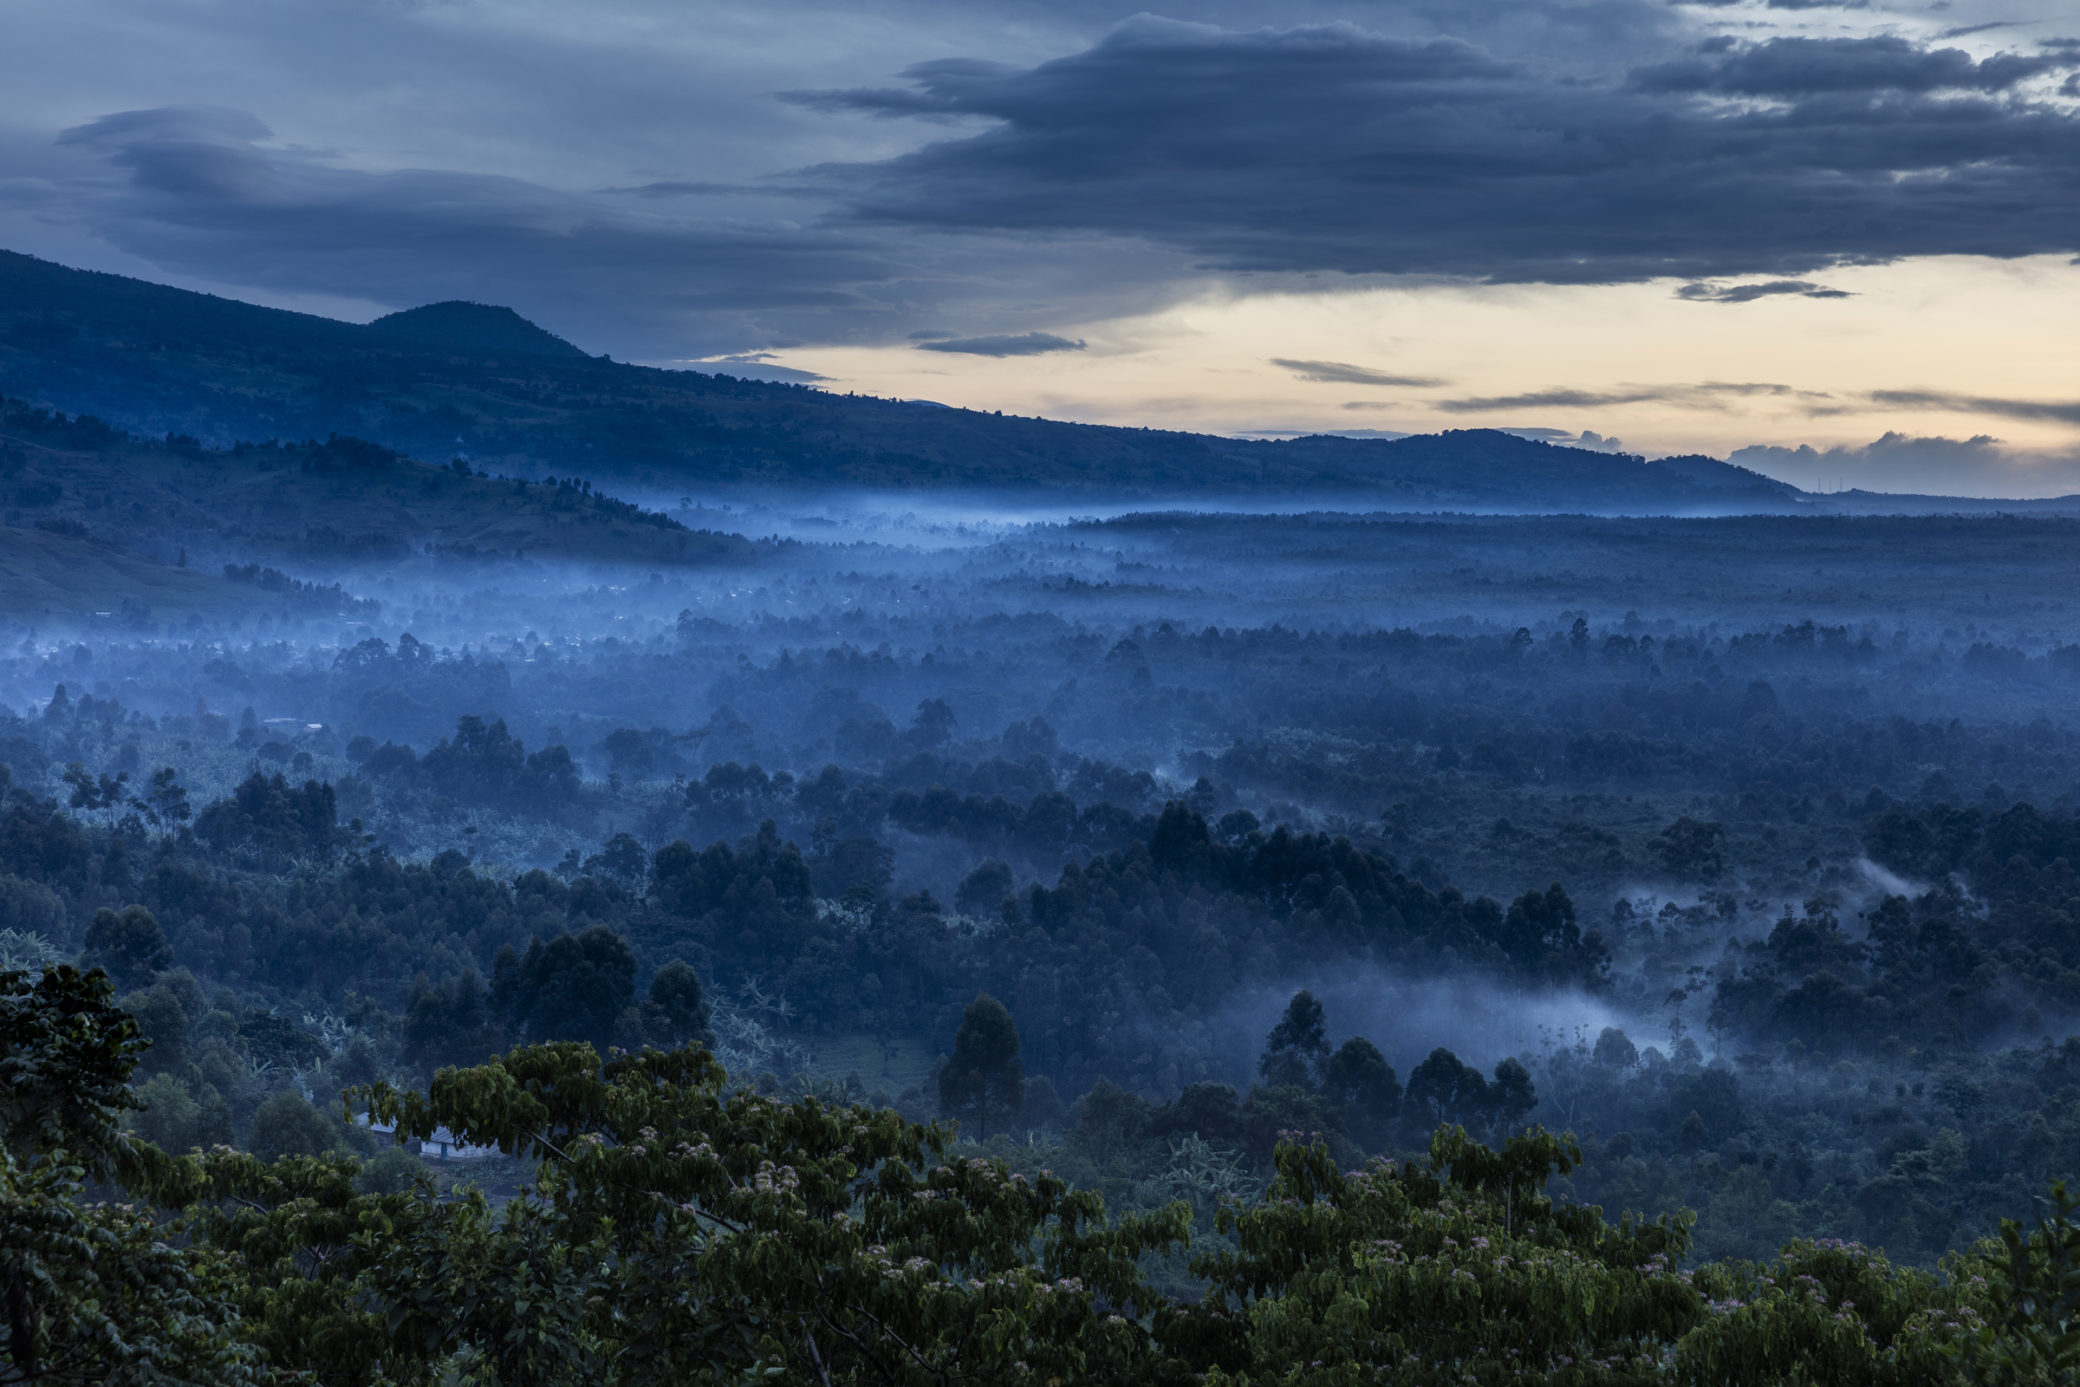 A scenic image of early morning mists over the rainforest